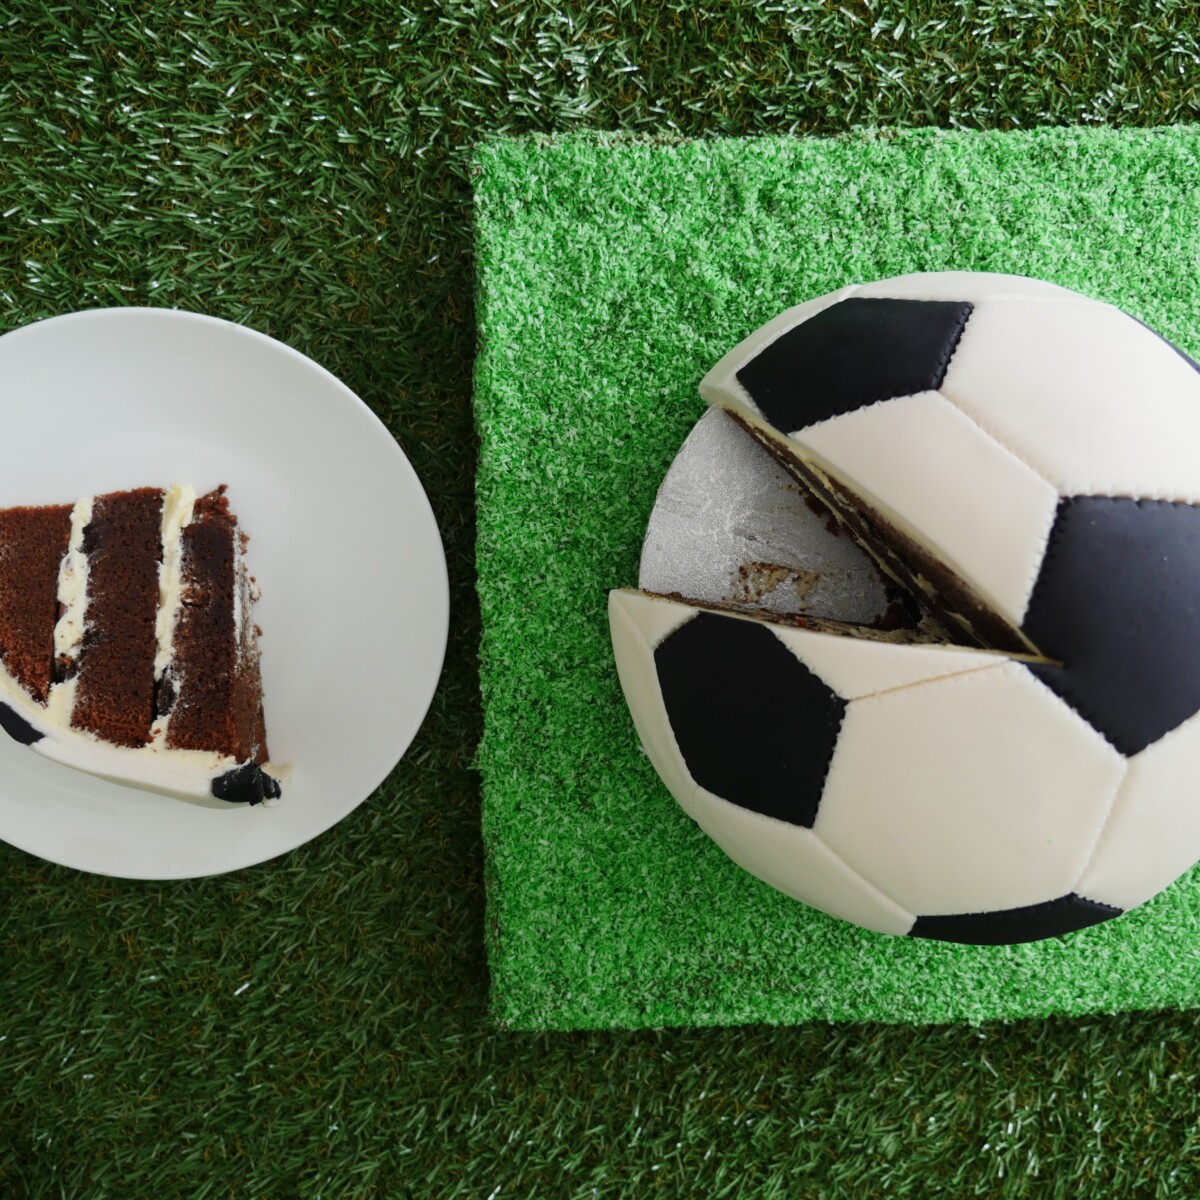 HowToCookThat : Cakes, Dessert & Chocolate  Soccer Ball Cake -  HowToCookThat : Cakes, Dessert & Chocolate